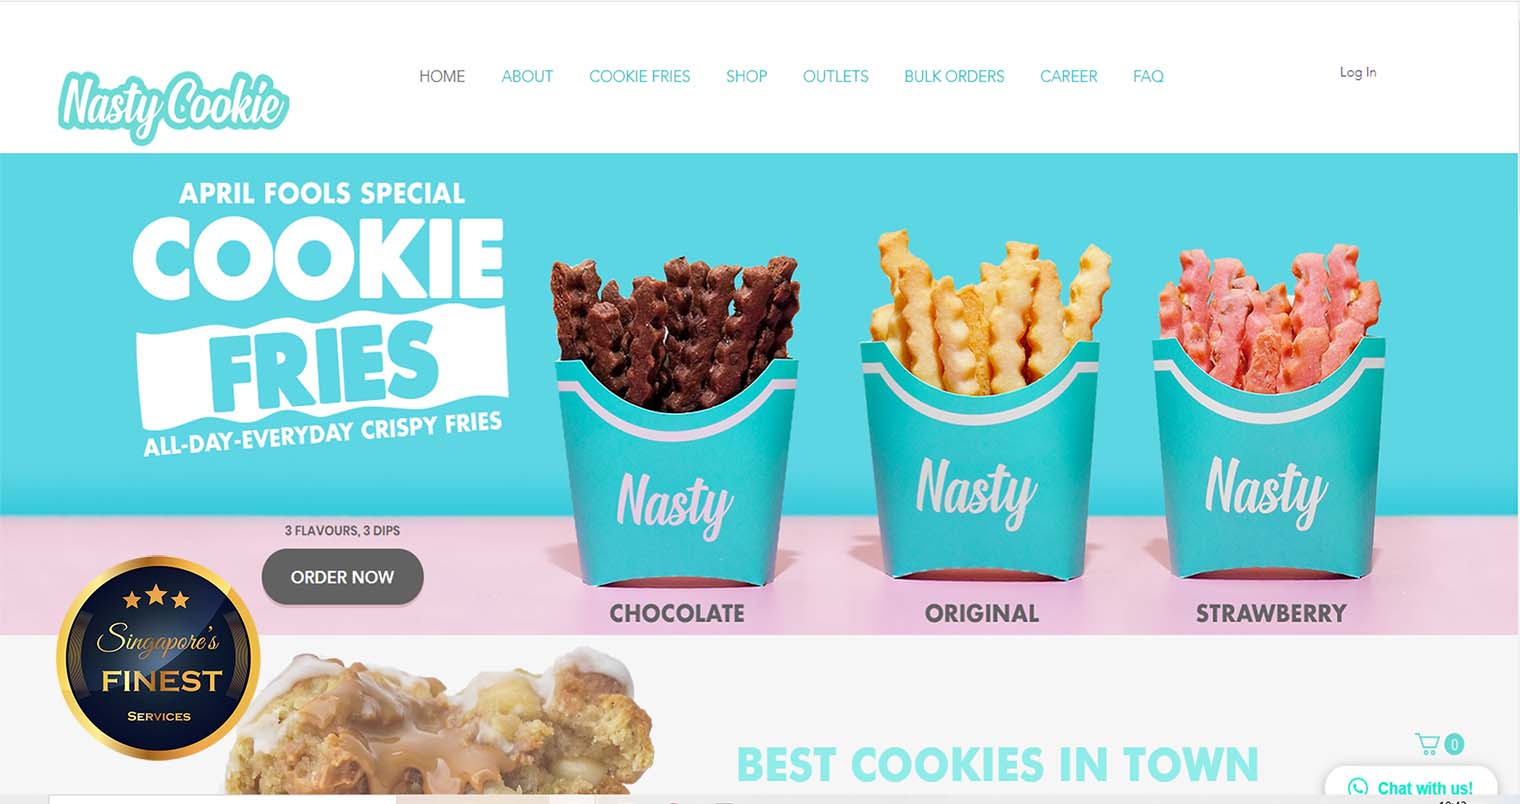 Nasty Cookie - Dessert Places in Singapore